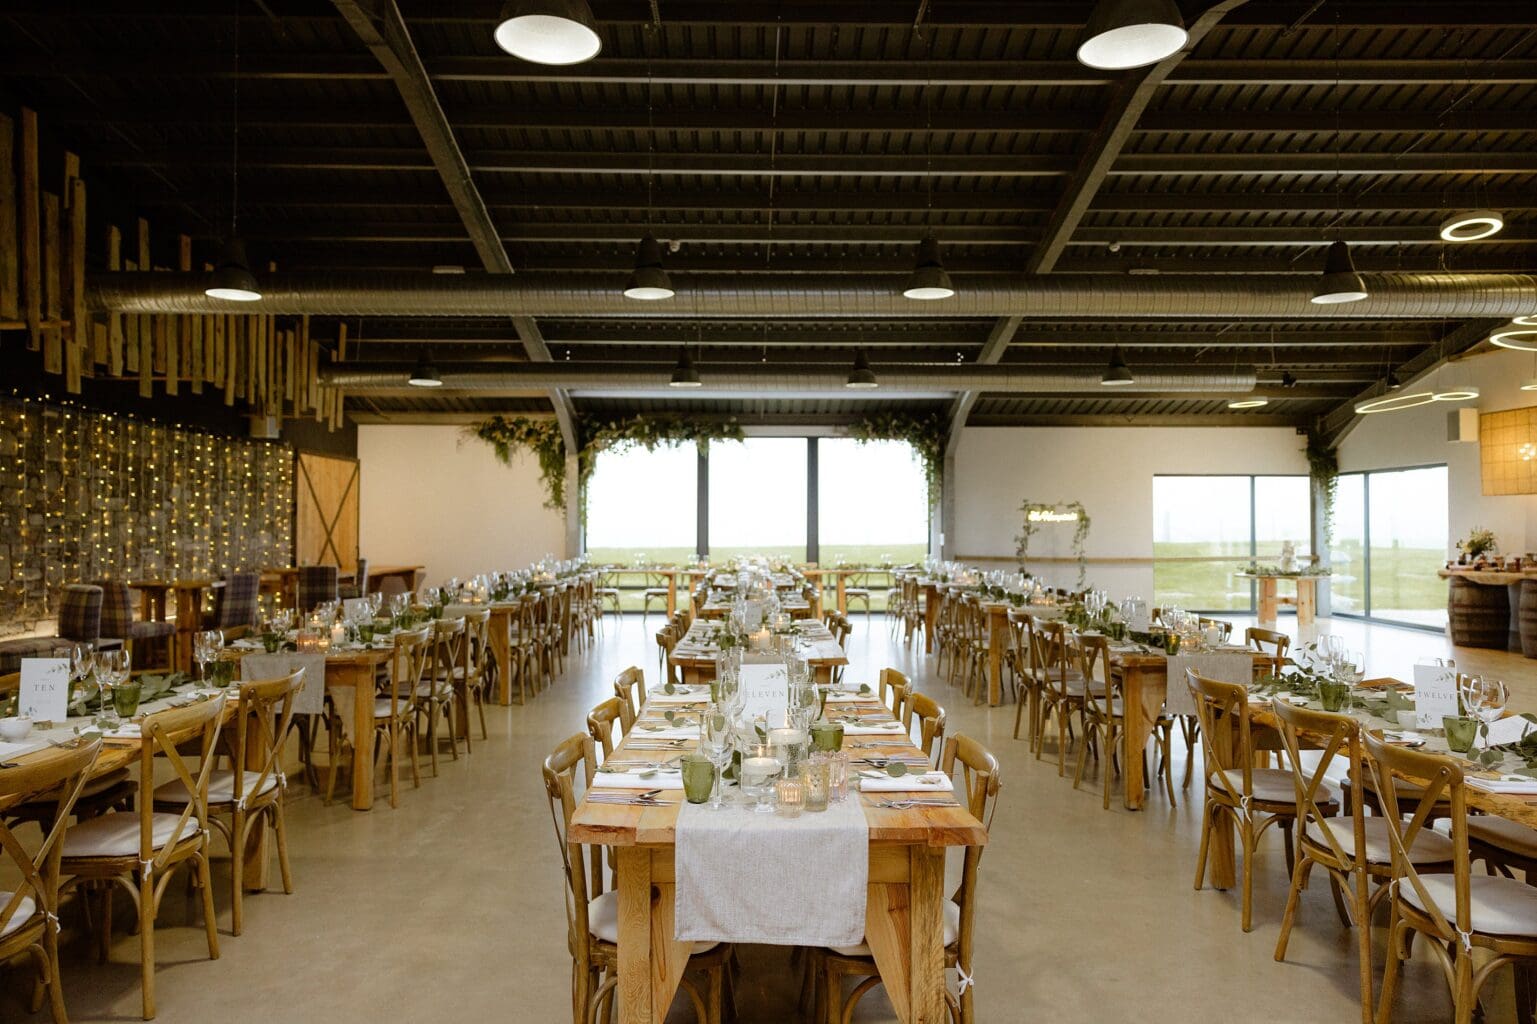 rows of tables set for dinner with glassware candles and greenery at barn wedding venues west lothian a large window wooden paneling and stings of fairy lights are visible in the background